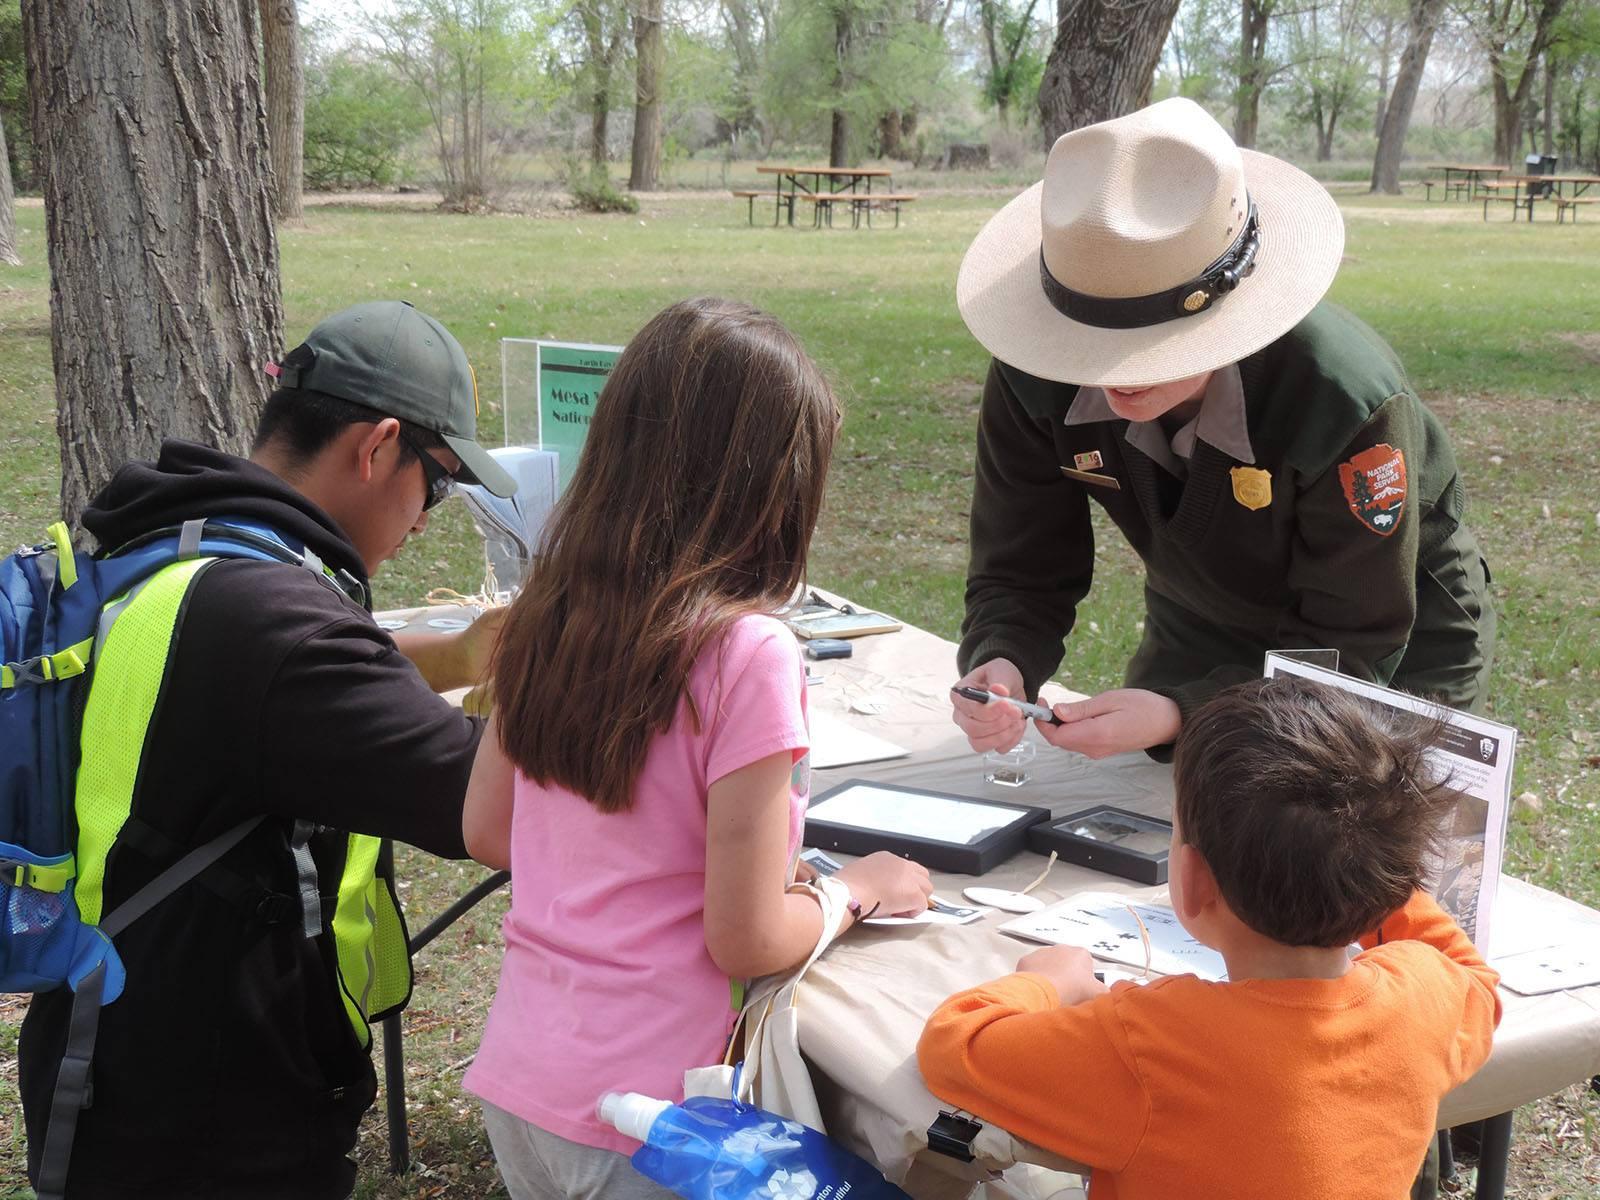 3 children work at a table in front of a park ranger.